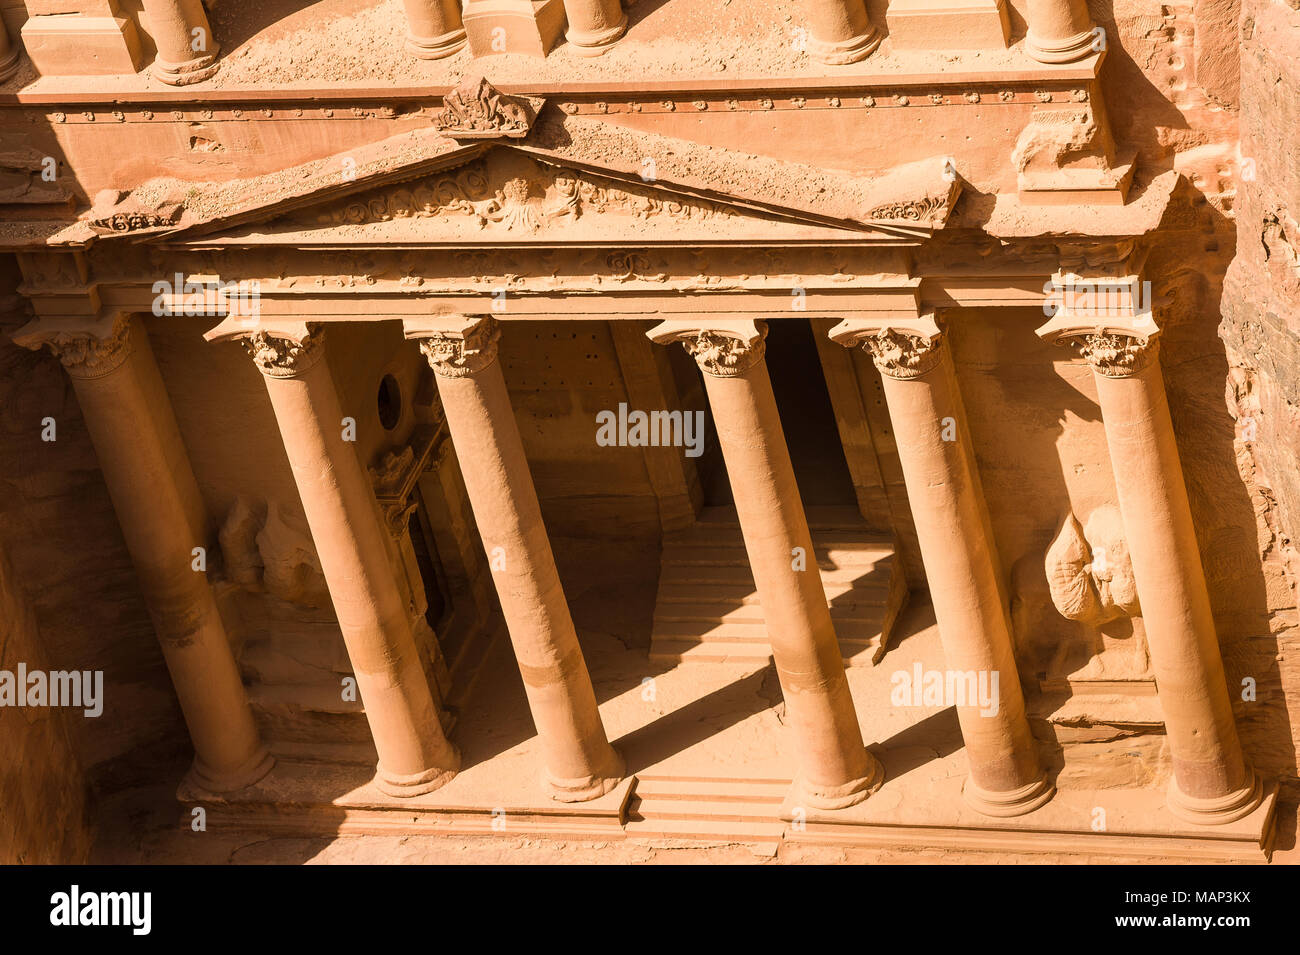 Al-Khazneh is one of the most elaborate temples in the ancient Arab Nabatean Kingdom city of Petra. Stock Photo